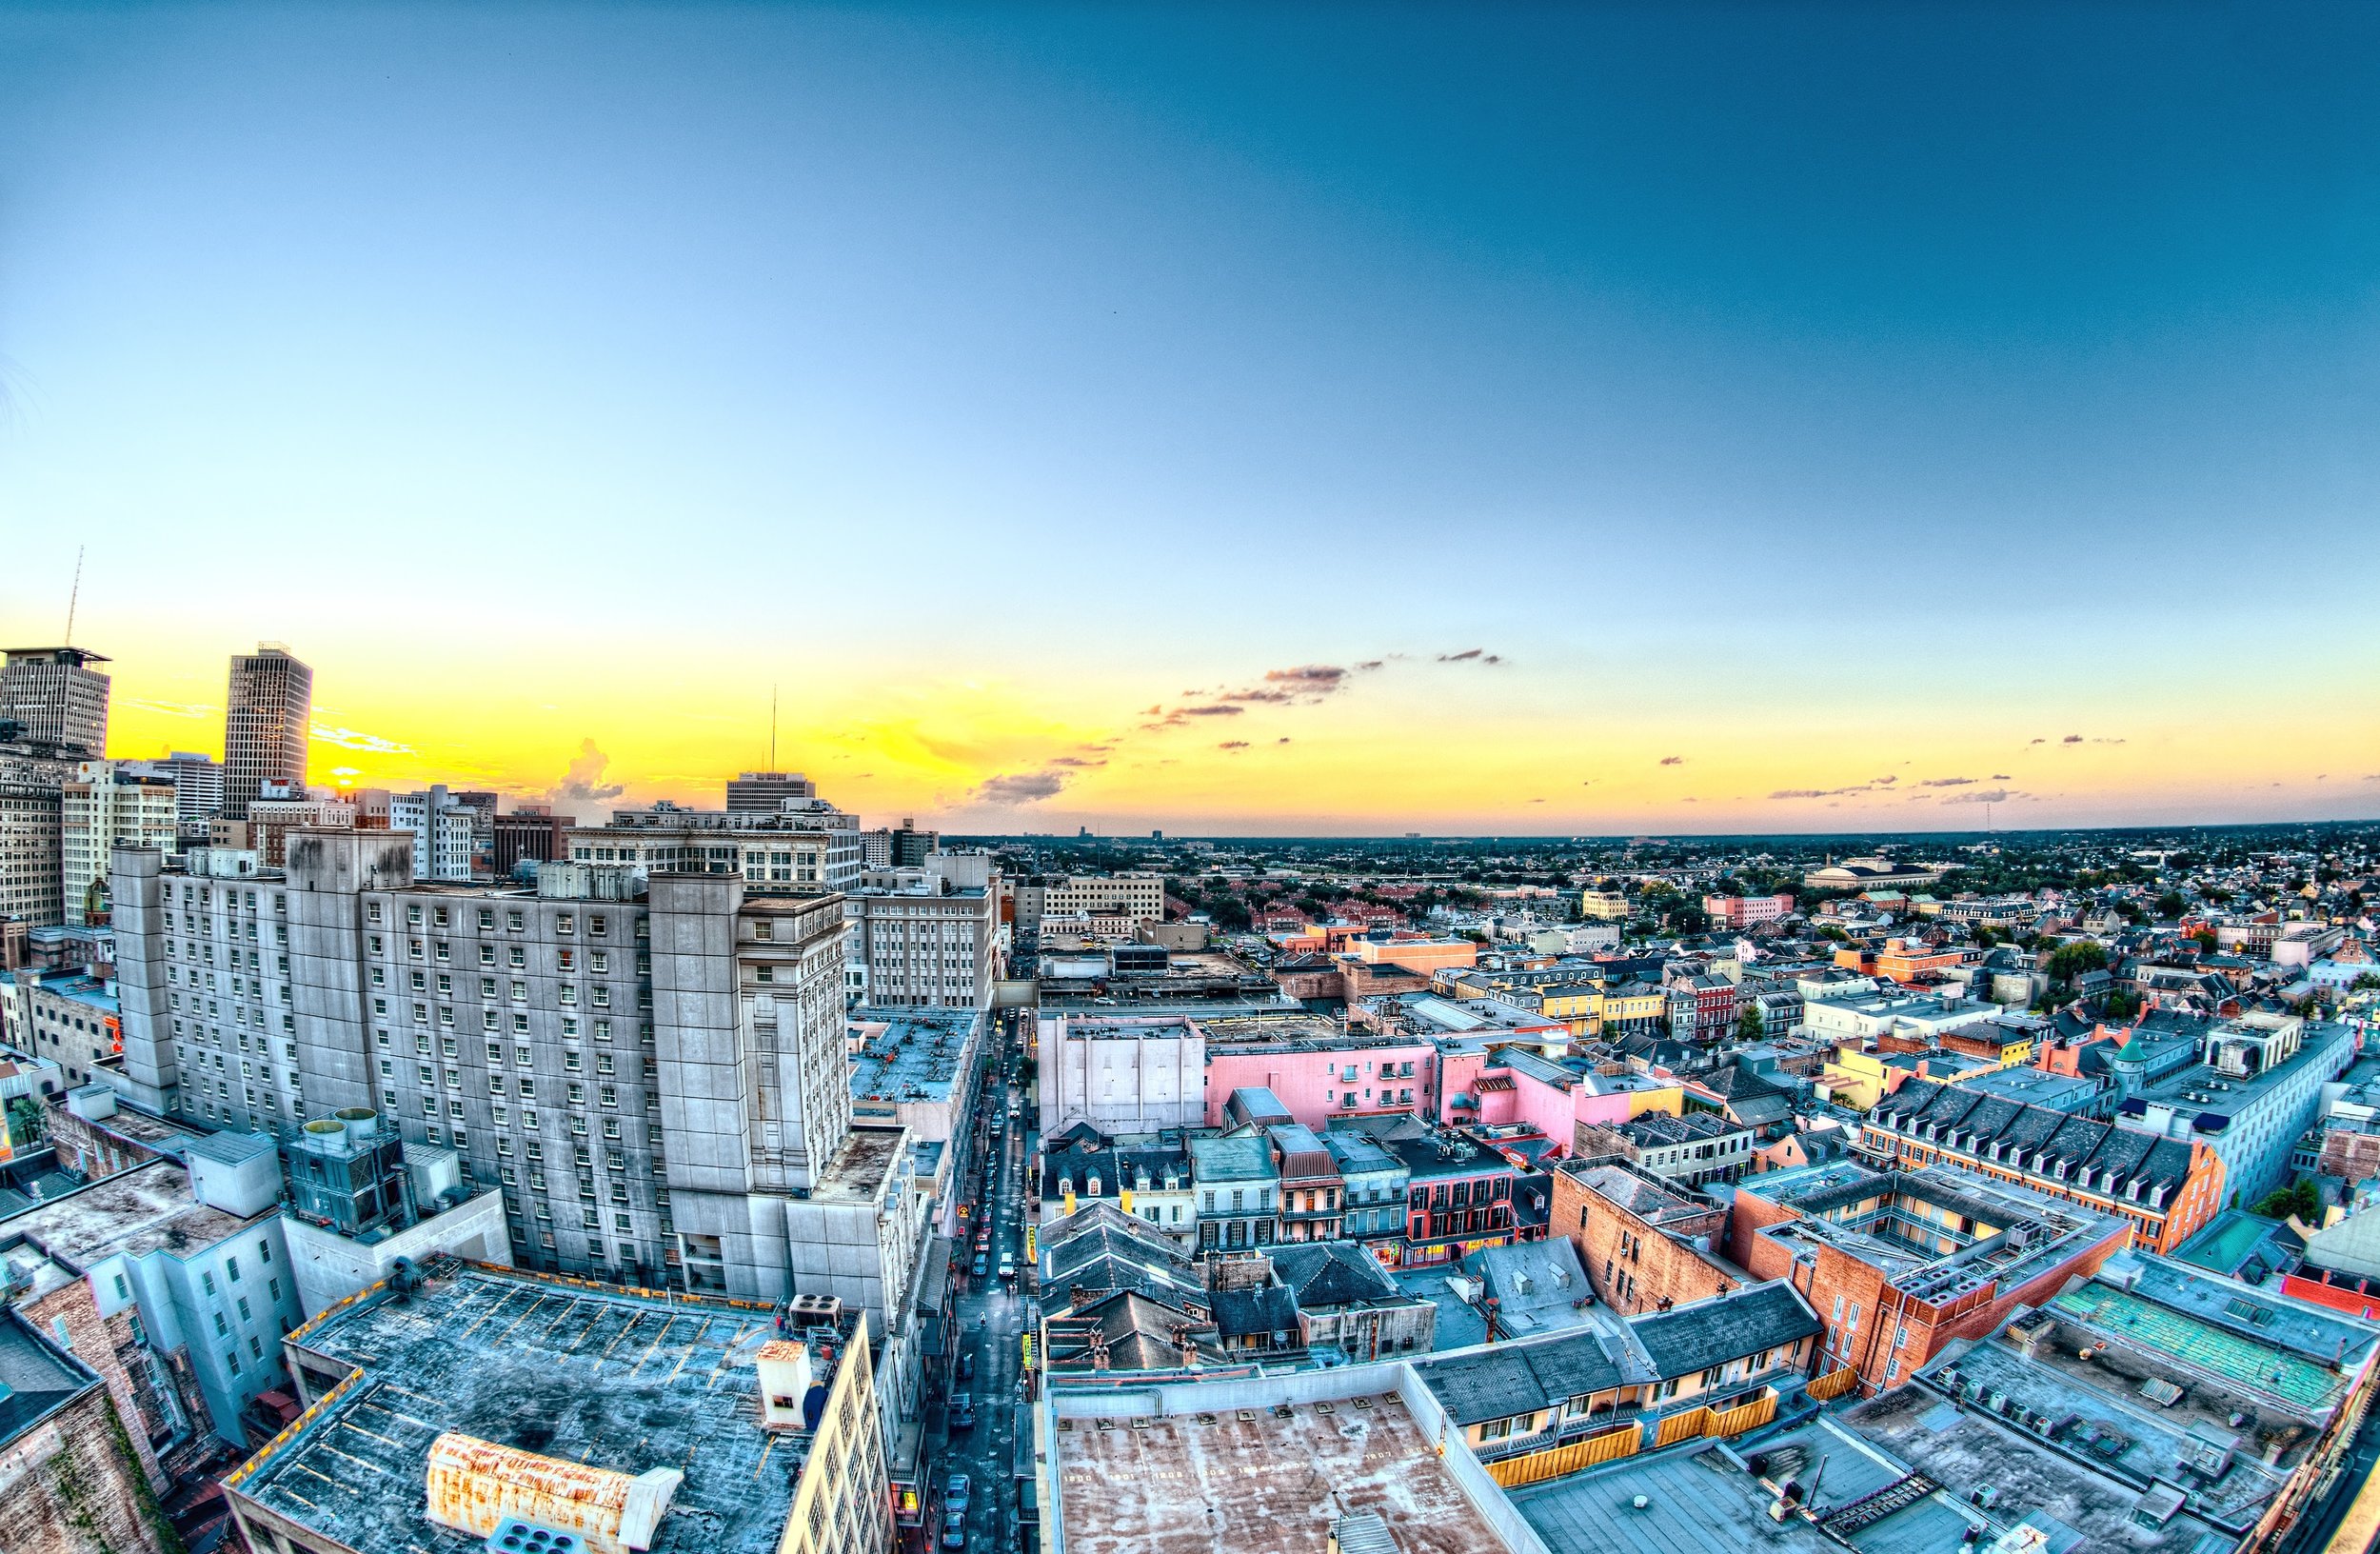 Panoramic image of a city at sunset